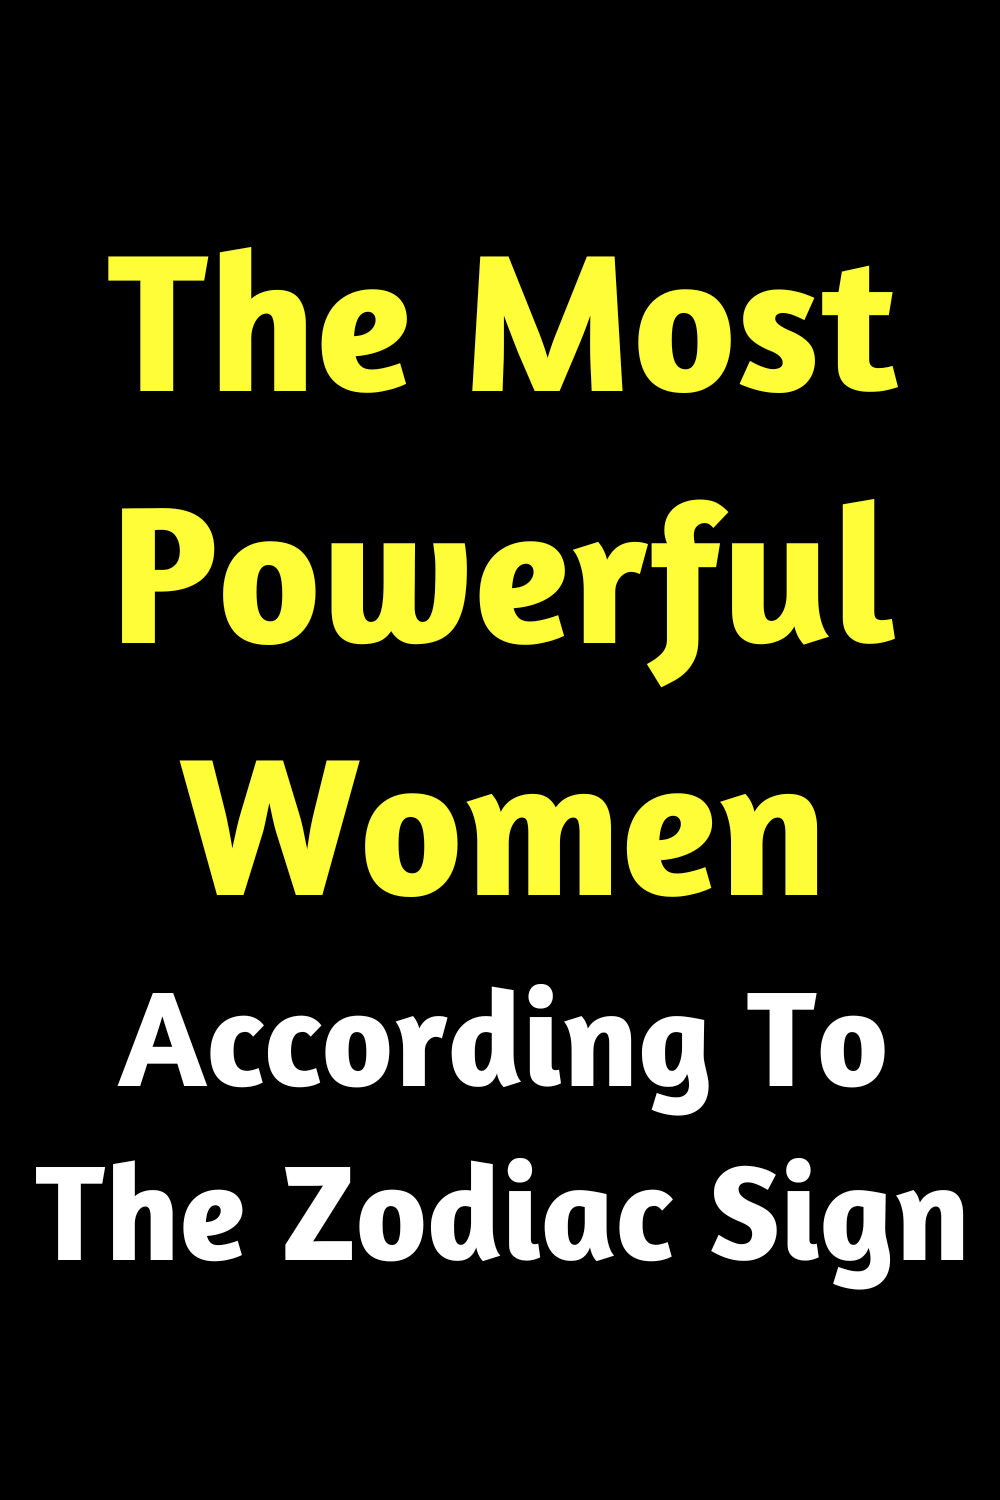 The Most Powerful Women According To The Zodiac Sign